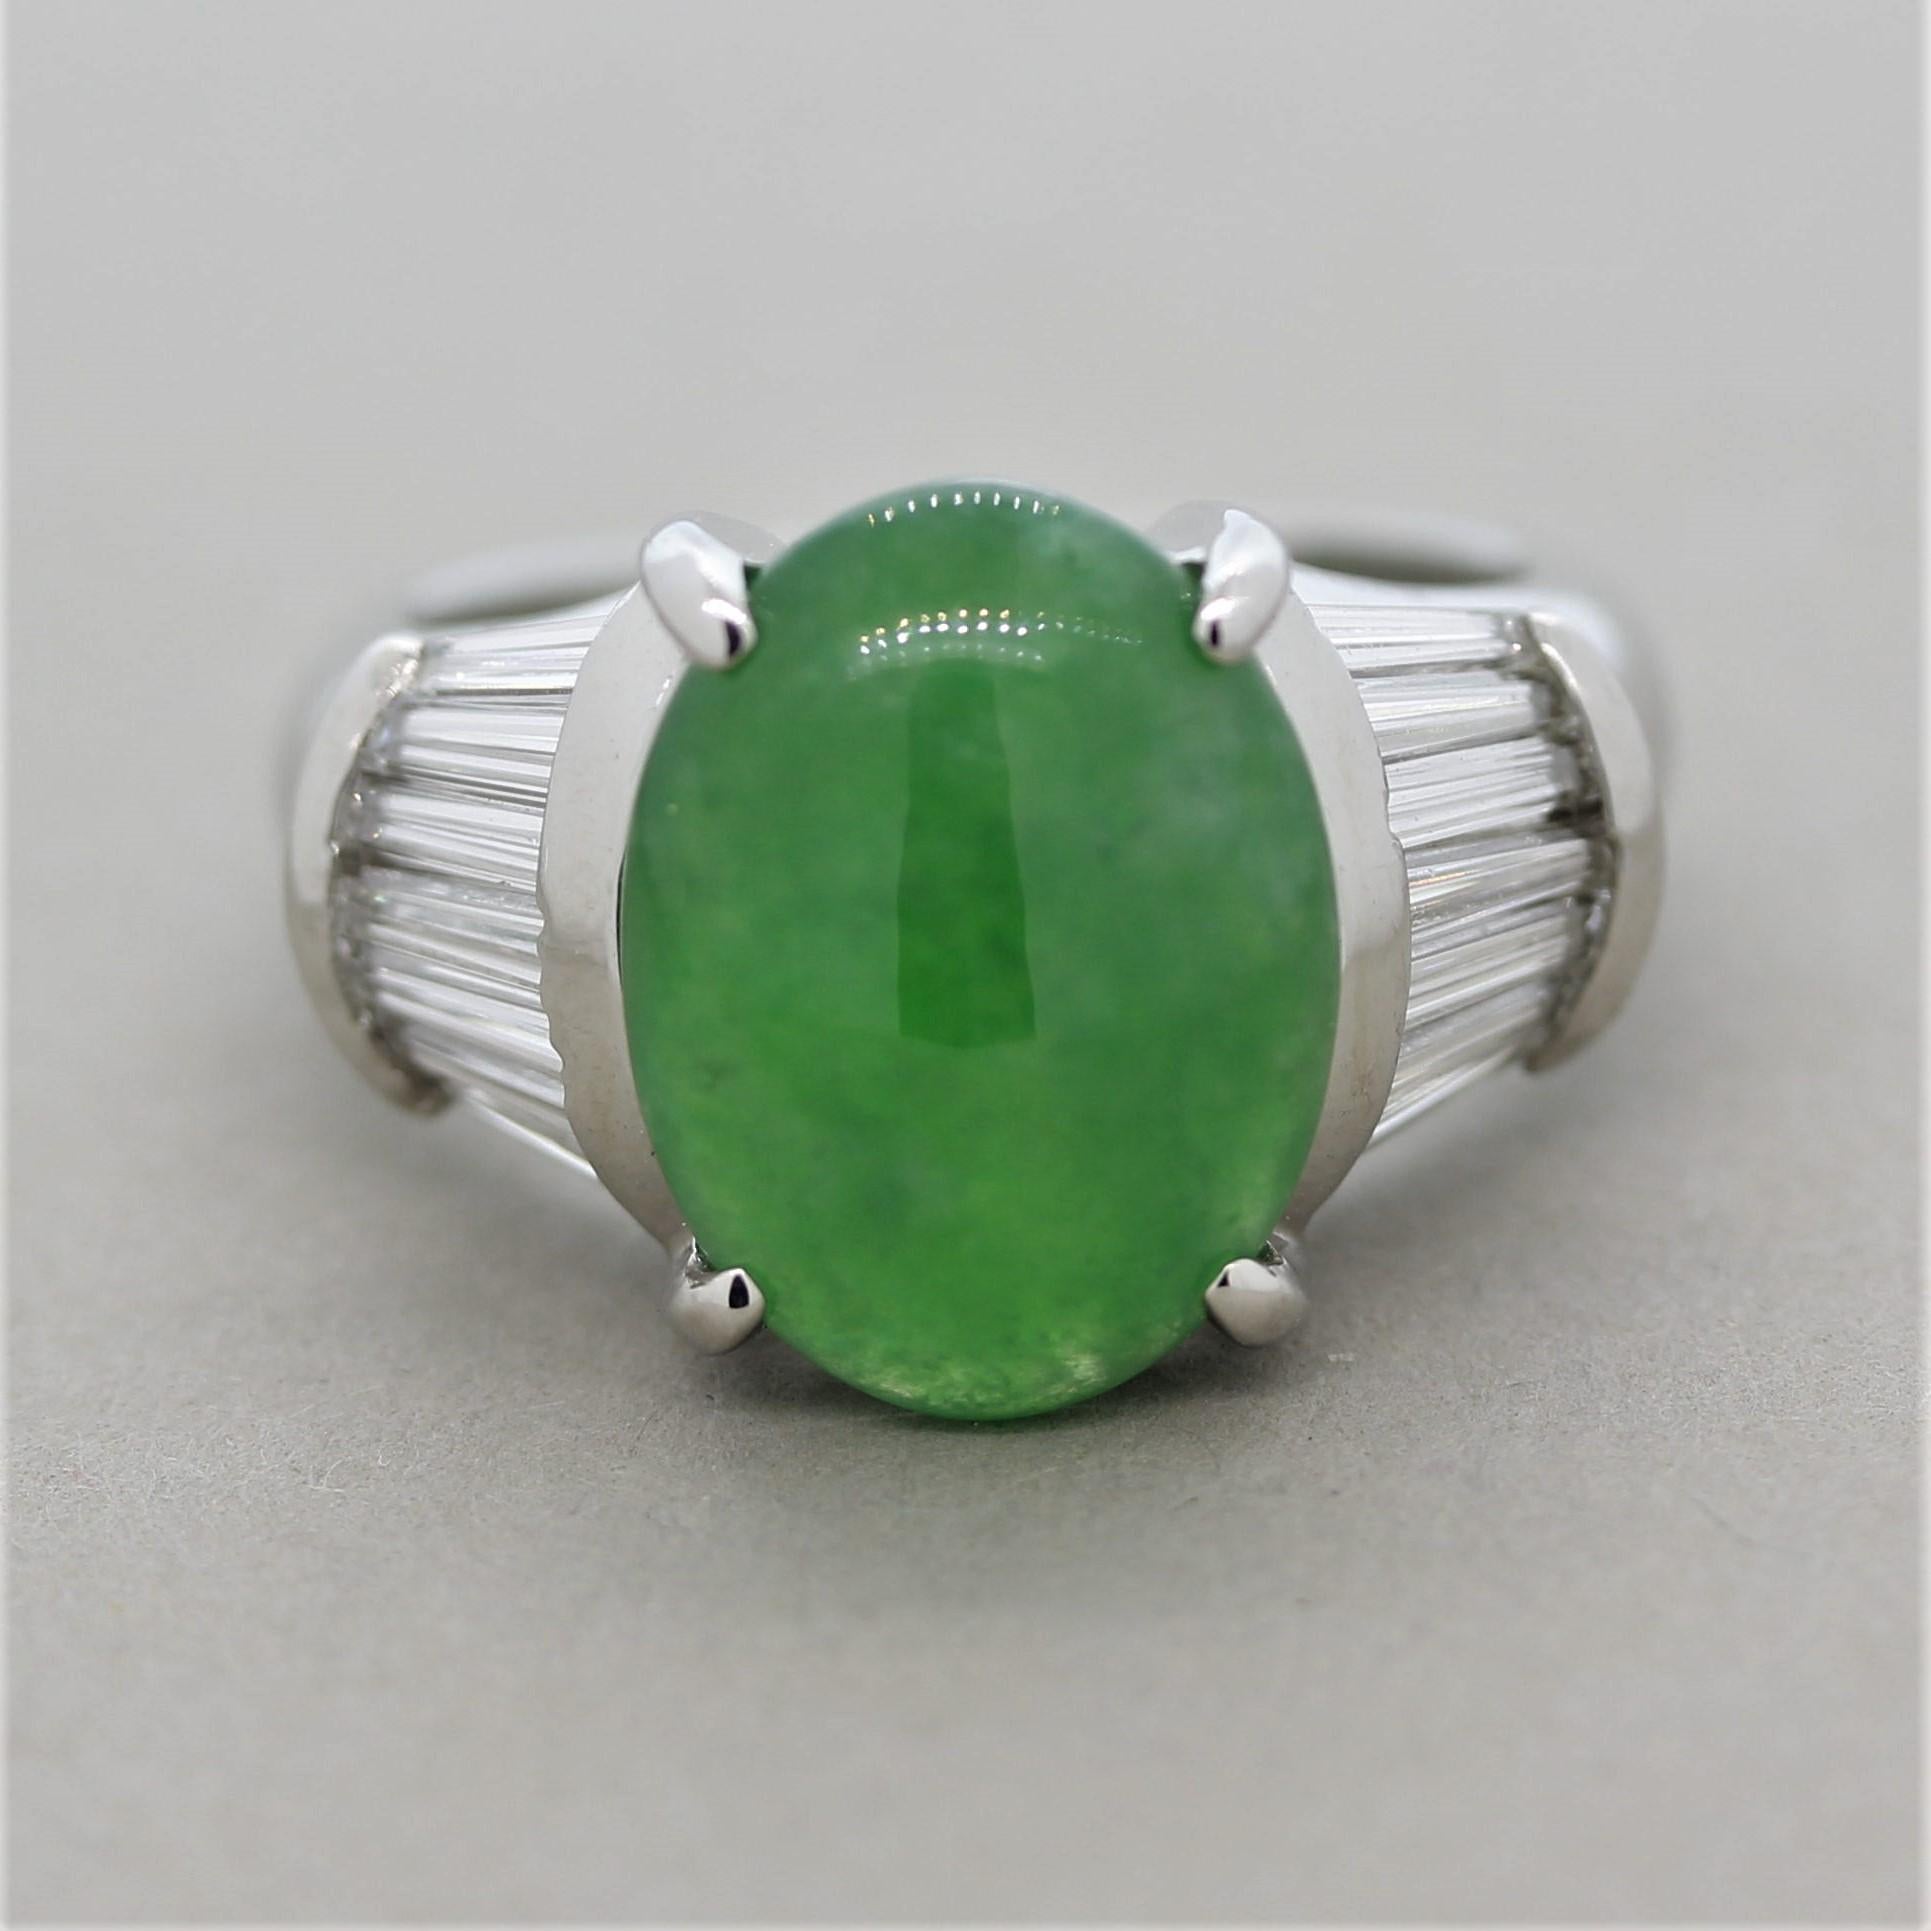 A lovely and well-made natural jadeite jade ring! The jade weighs 4.97 carats and has a luscious green color seen in finer pieces of jade. It is semi-translucent as it appears as light is glowing from the interior of the stone. It is accented by